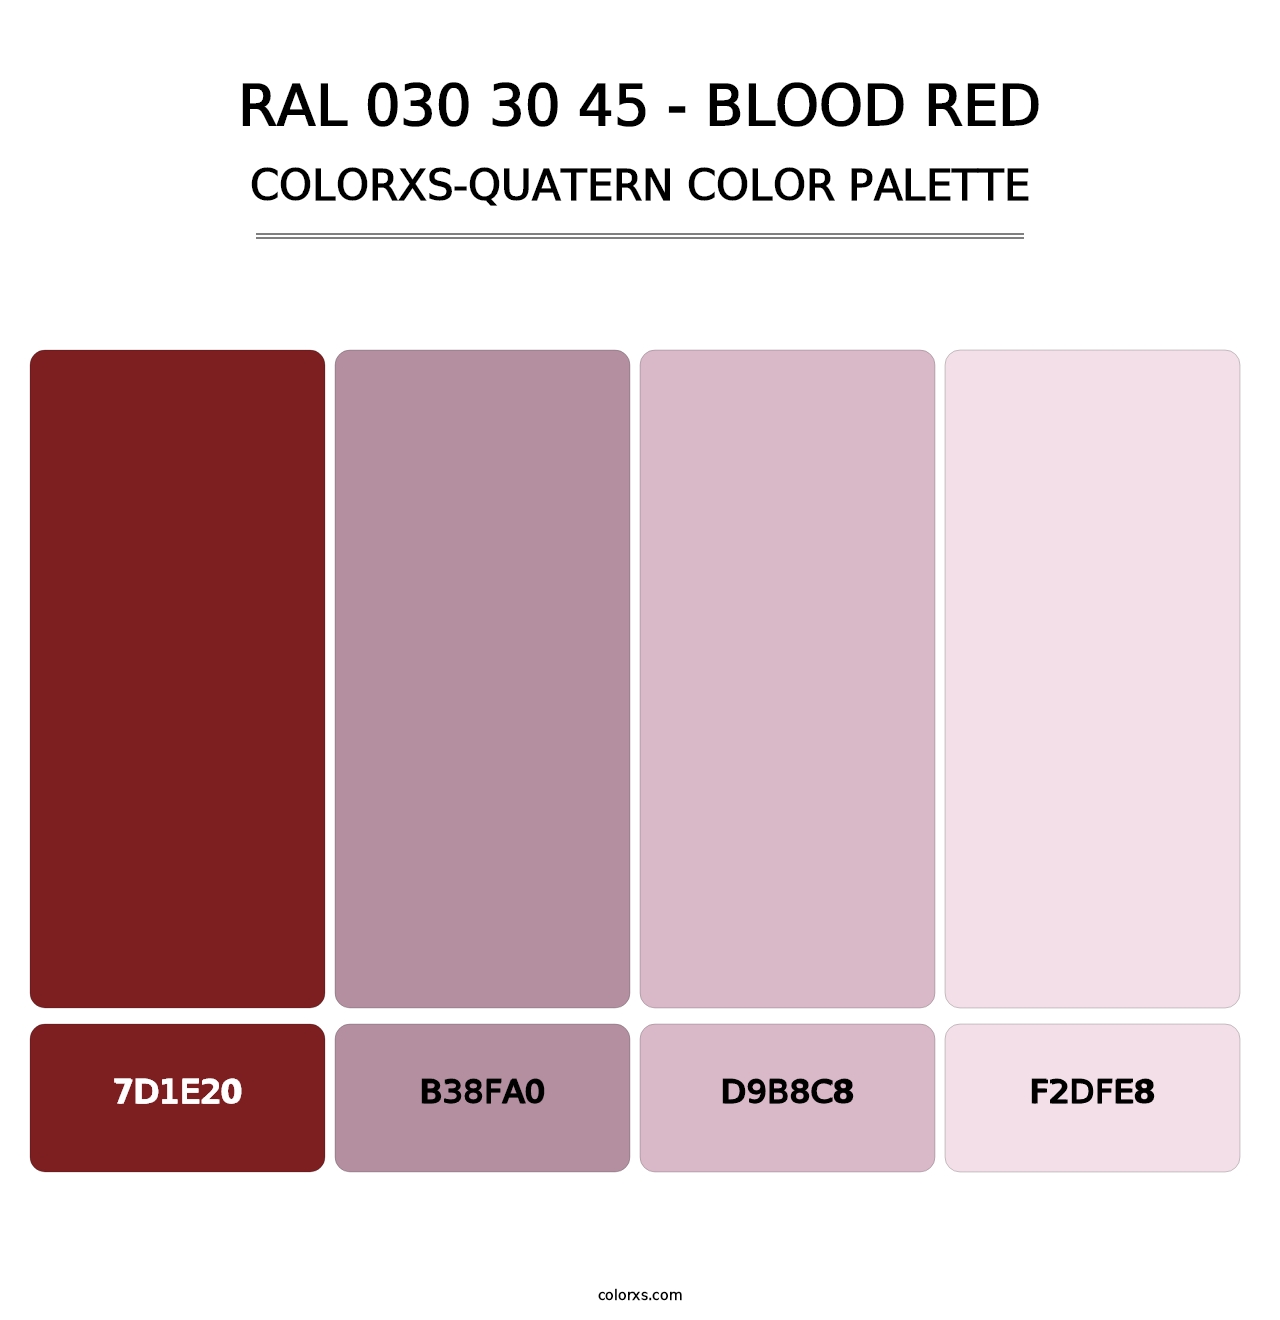 RAL 030 30 45 - Blood Red - Colorxs Quatern Palette